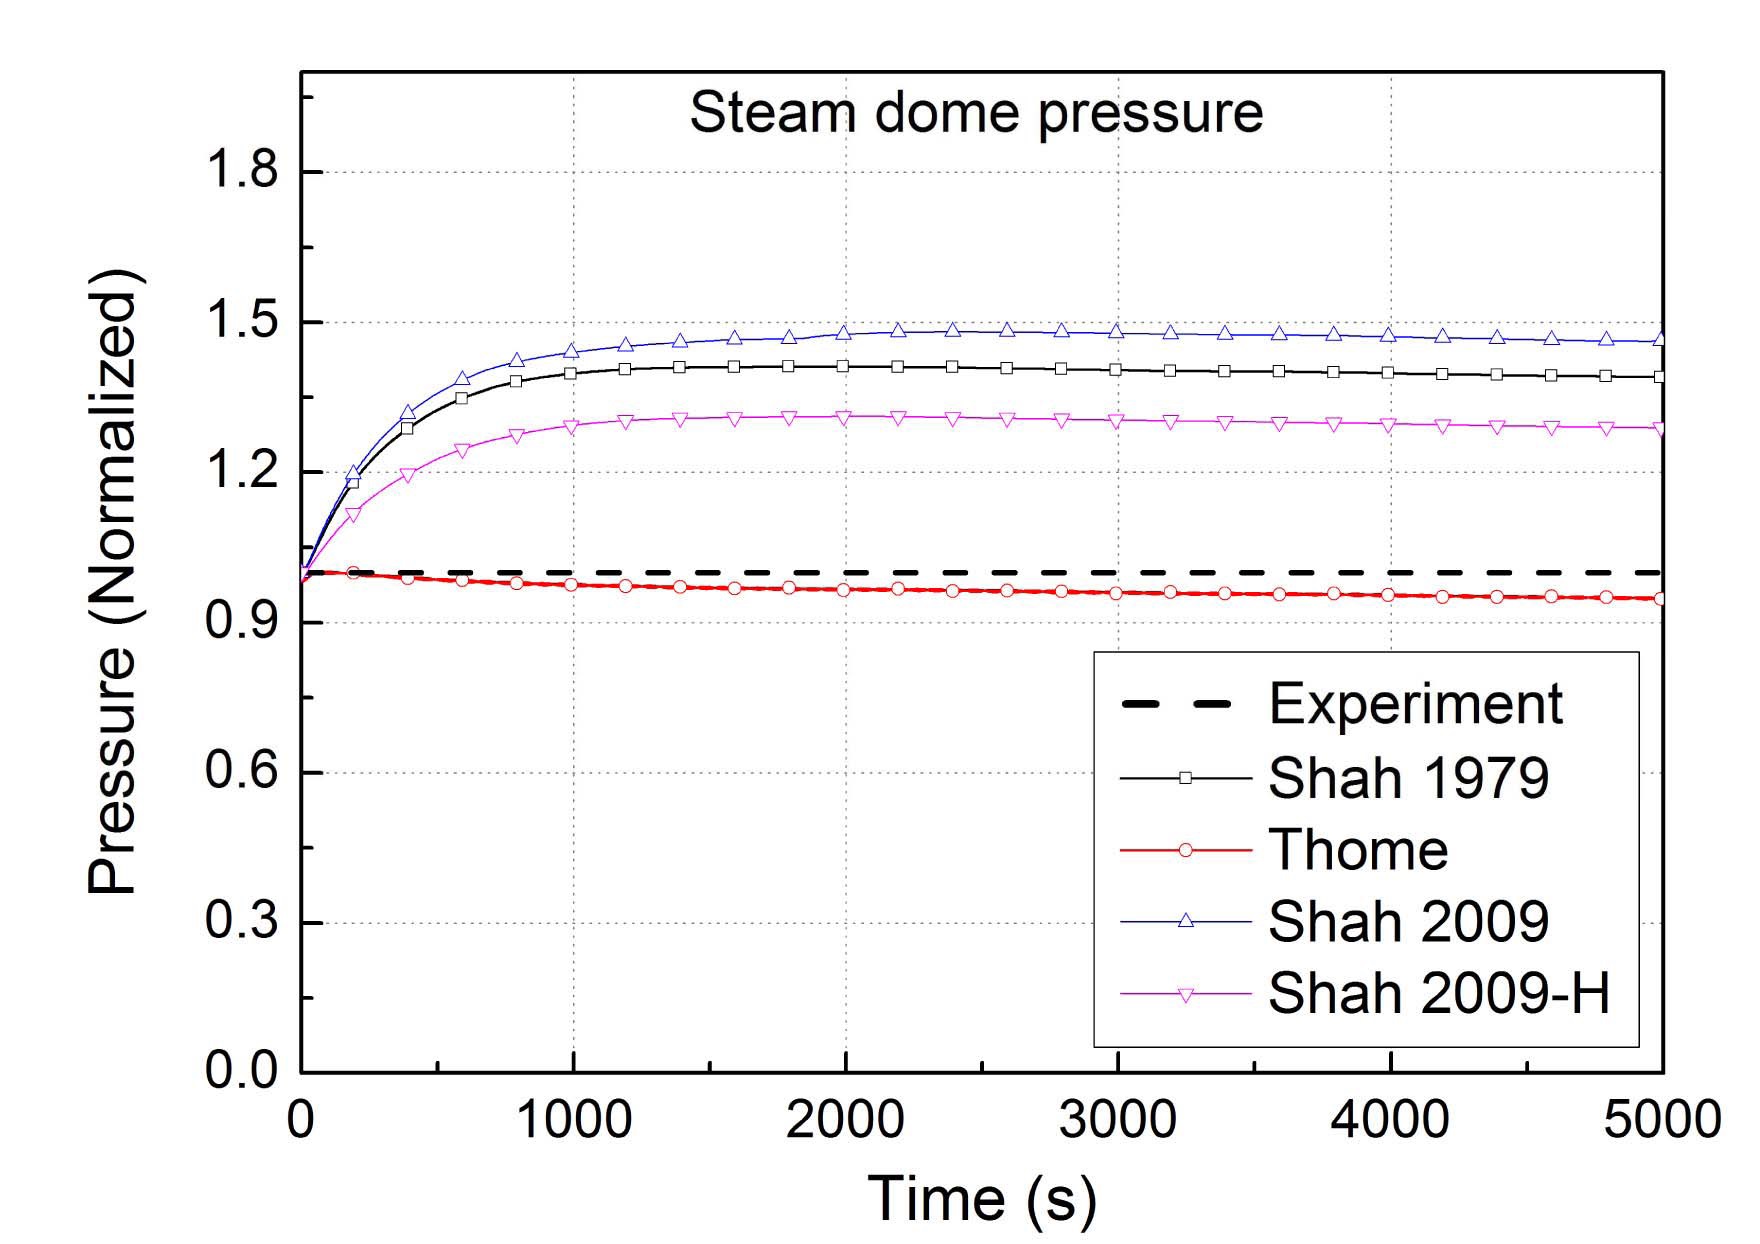 Transient of Pressure in the Steam Dome